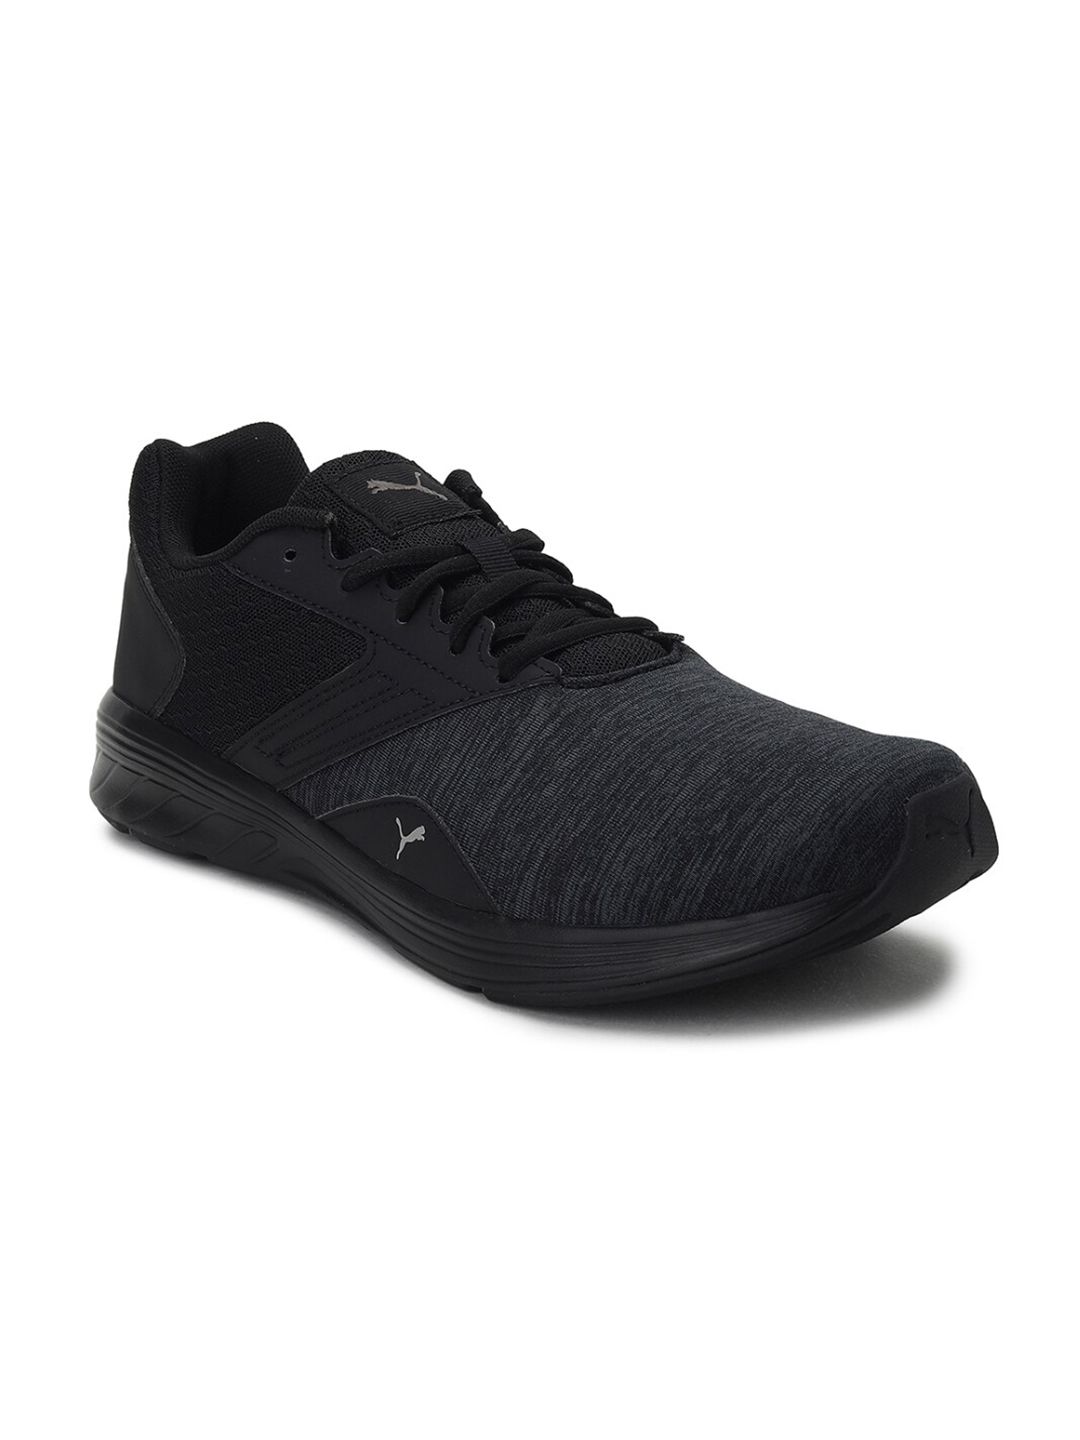 Puma Unisex Black Trigger Long Distance Running Shoes Price in India